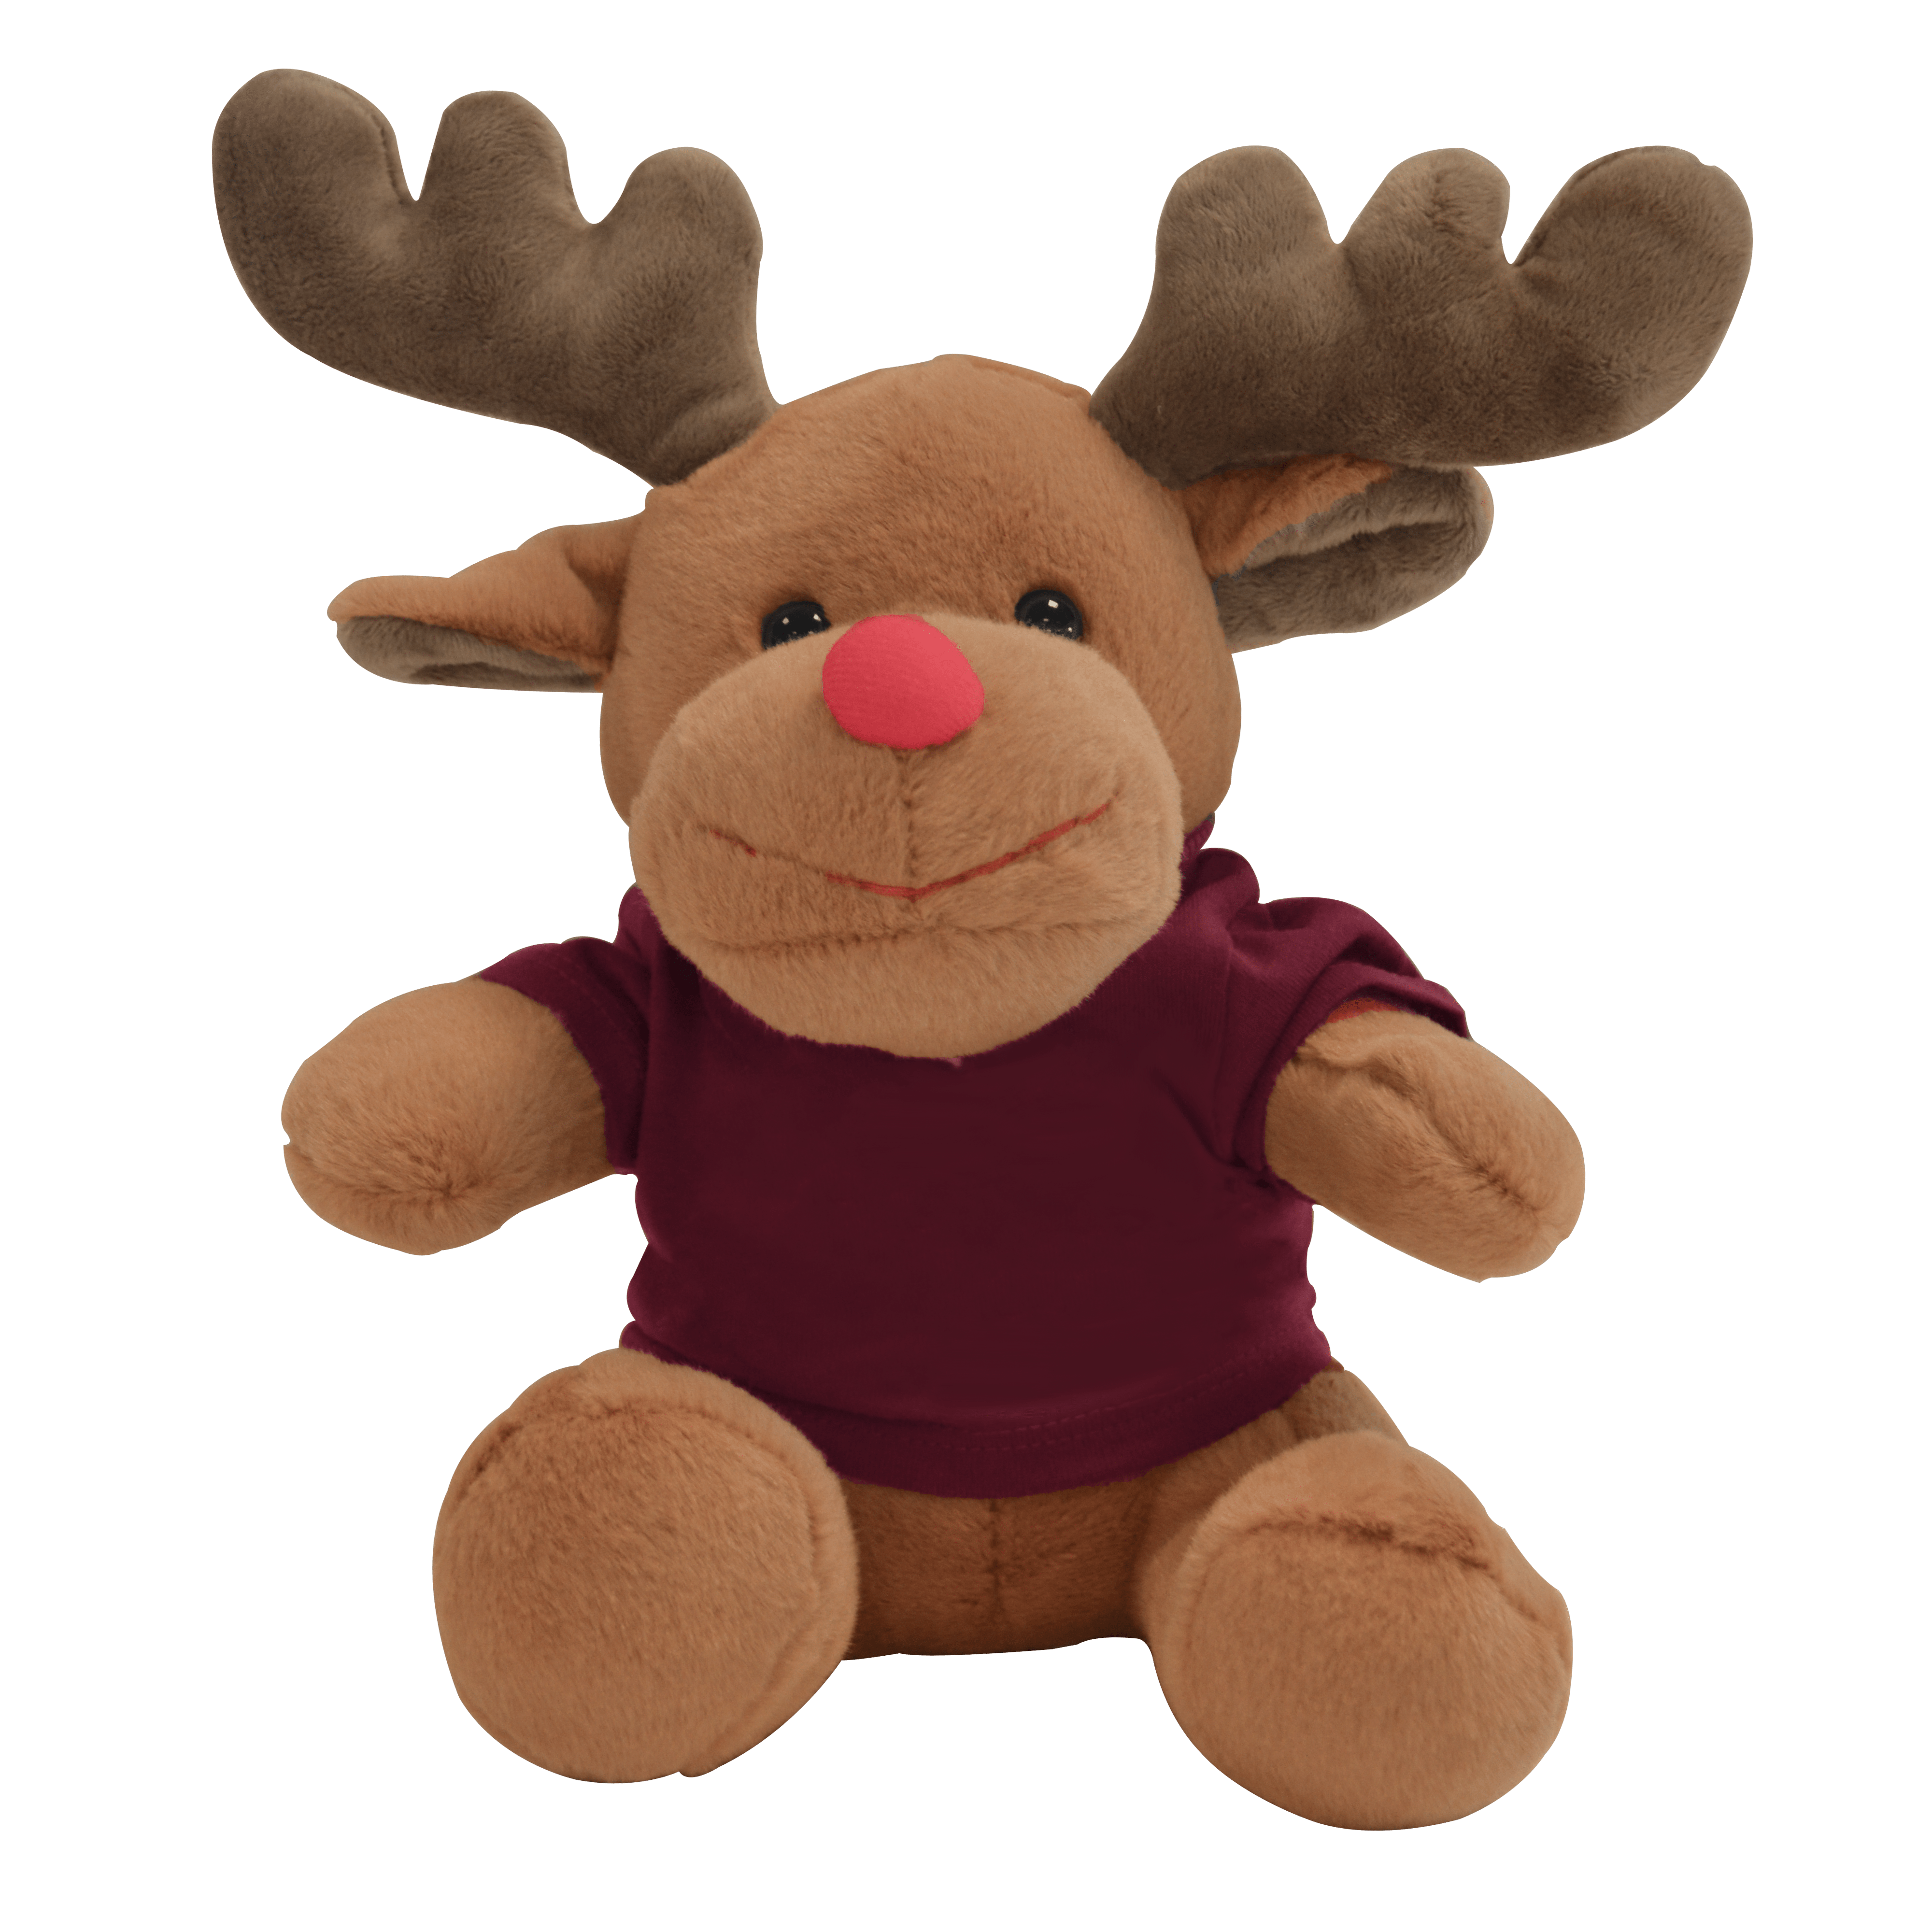 Stuffed animal reindeer with a bordeaux red tshirt